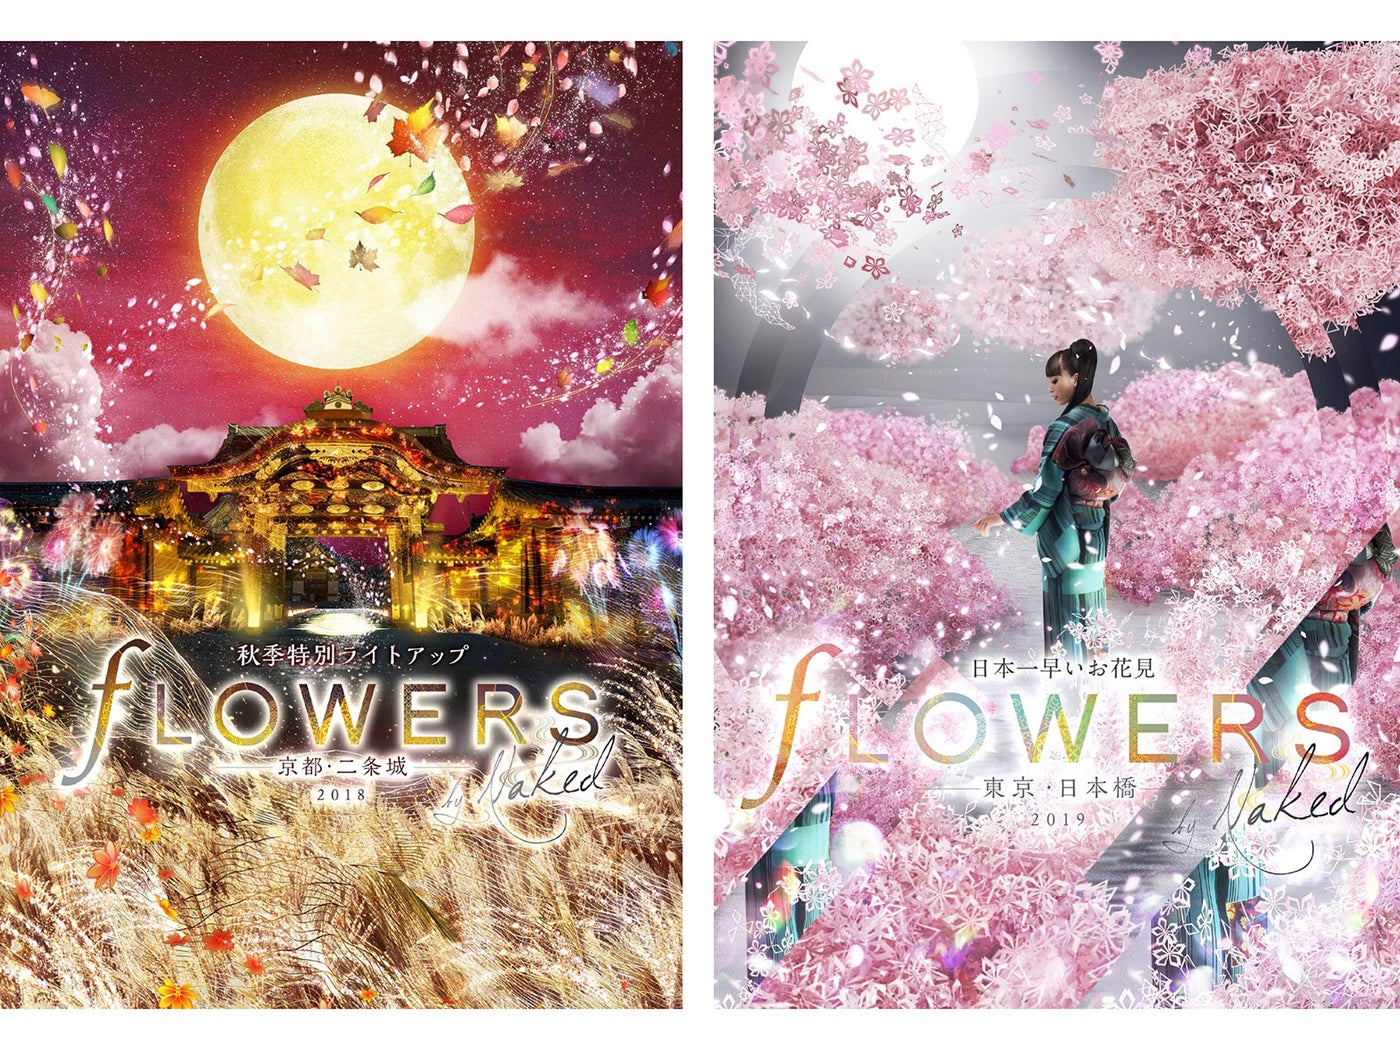 FLOWERS BY NAKED／画像提供：株式会社ネイキッド